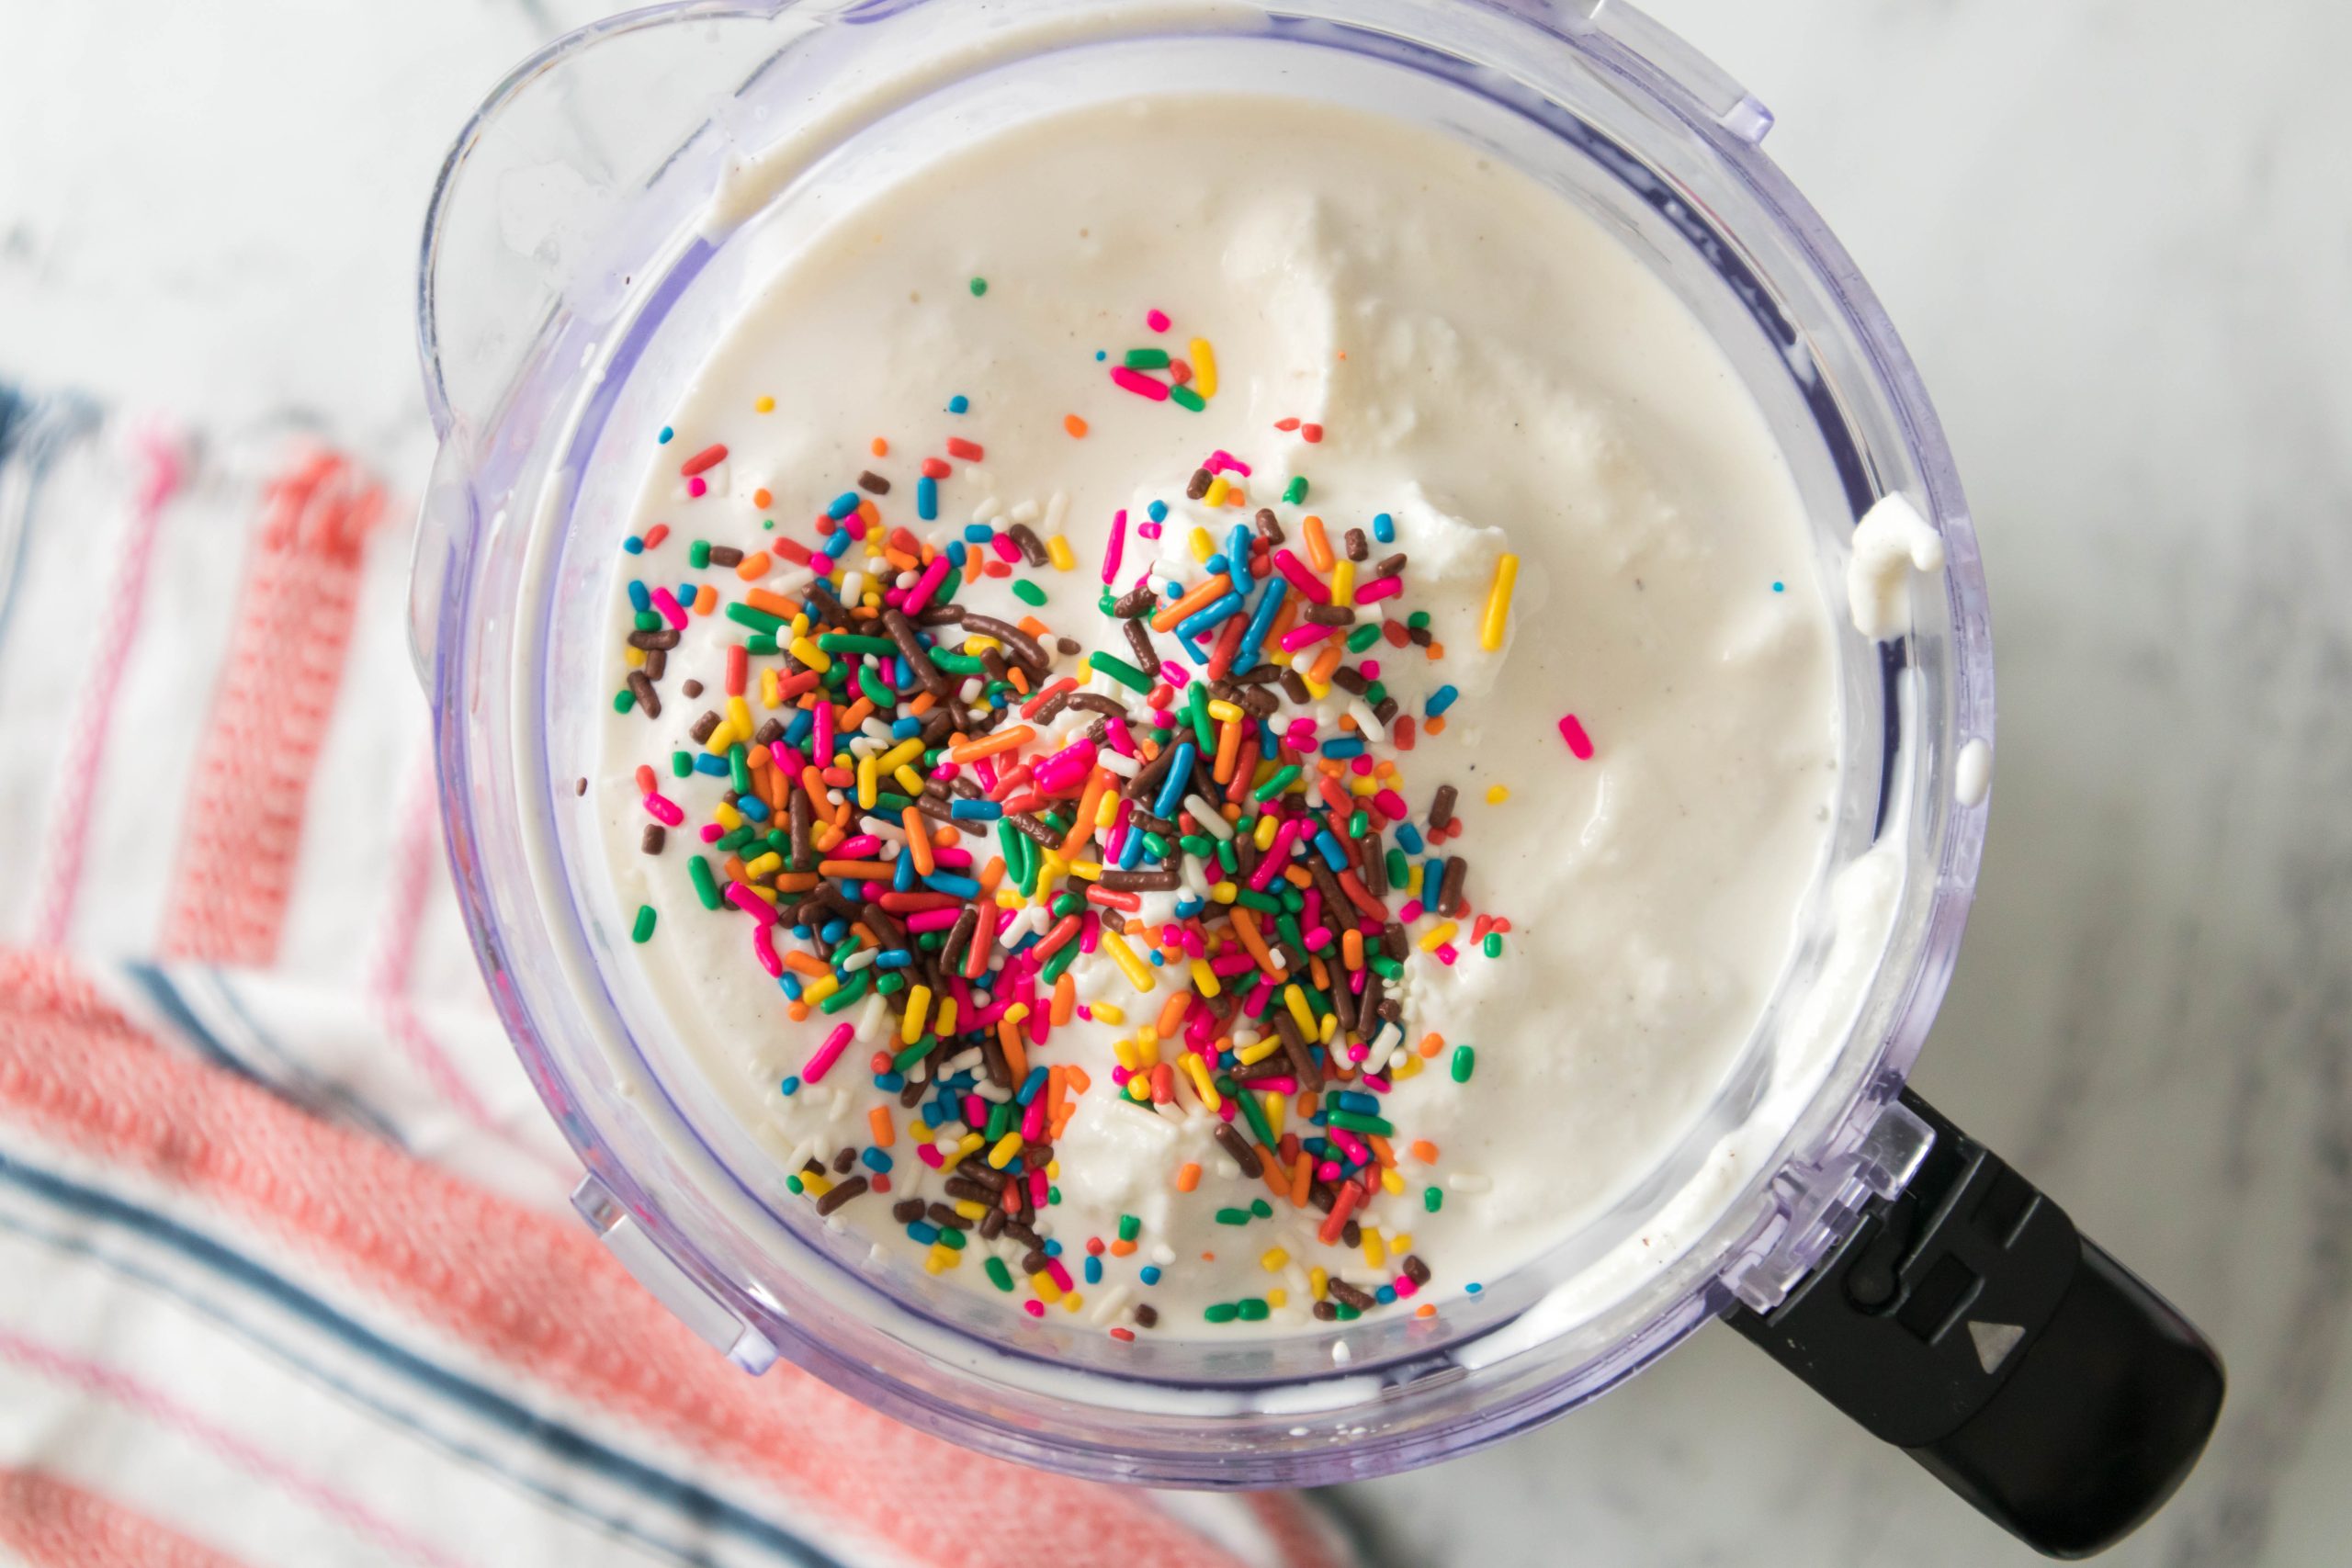 sprinkles on top of the ice cream